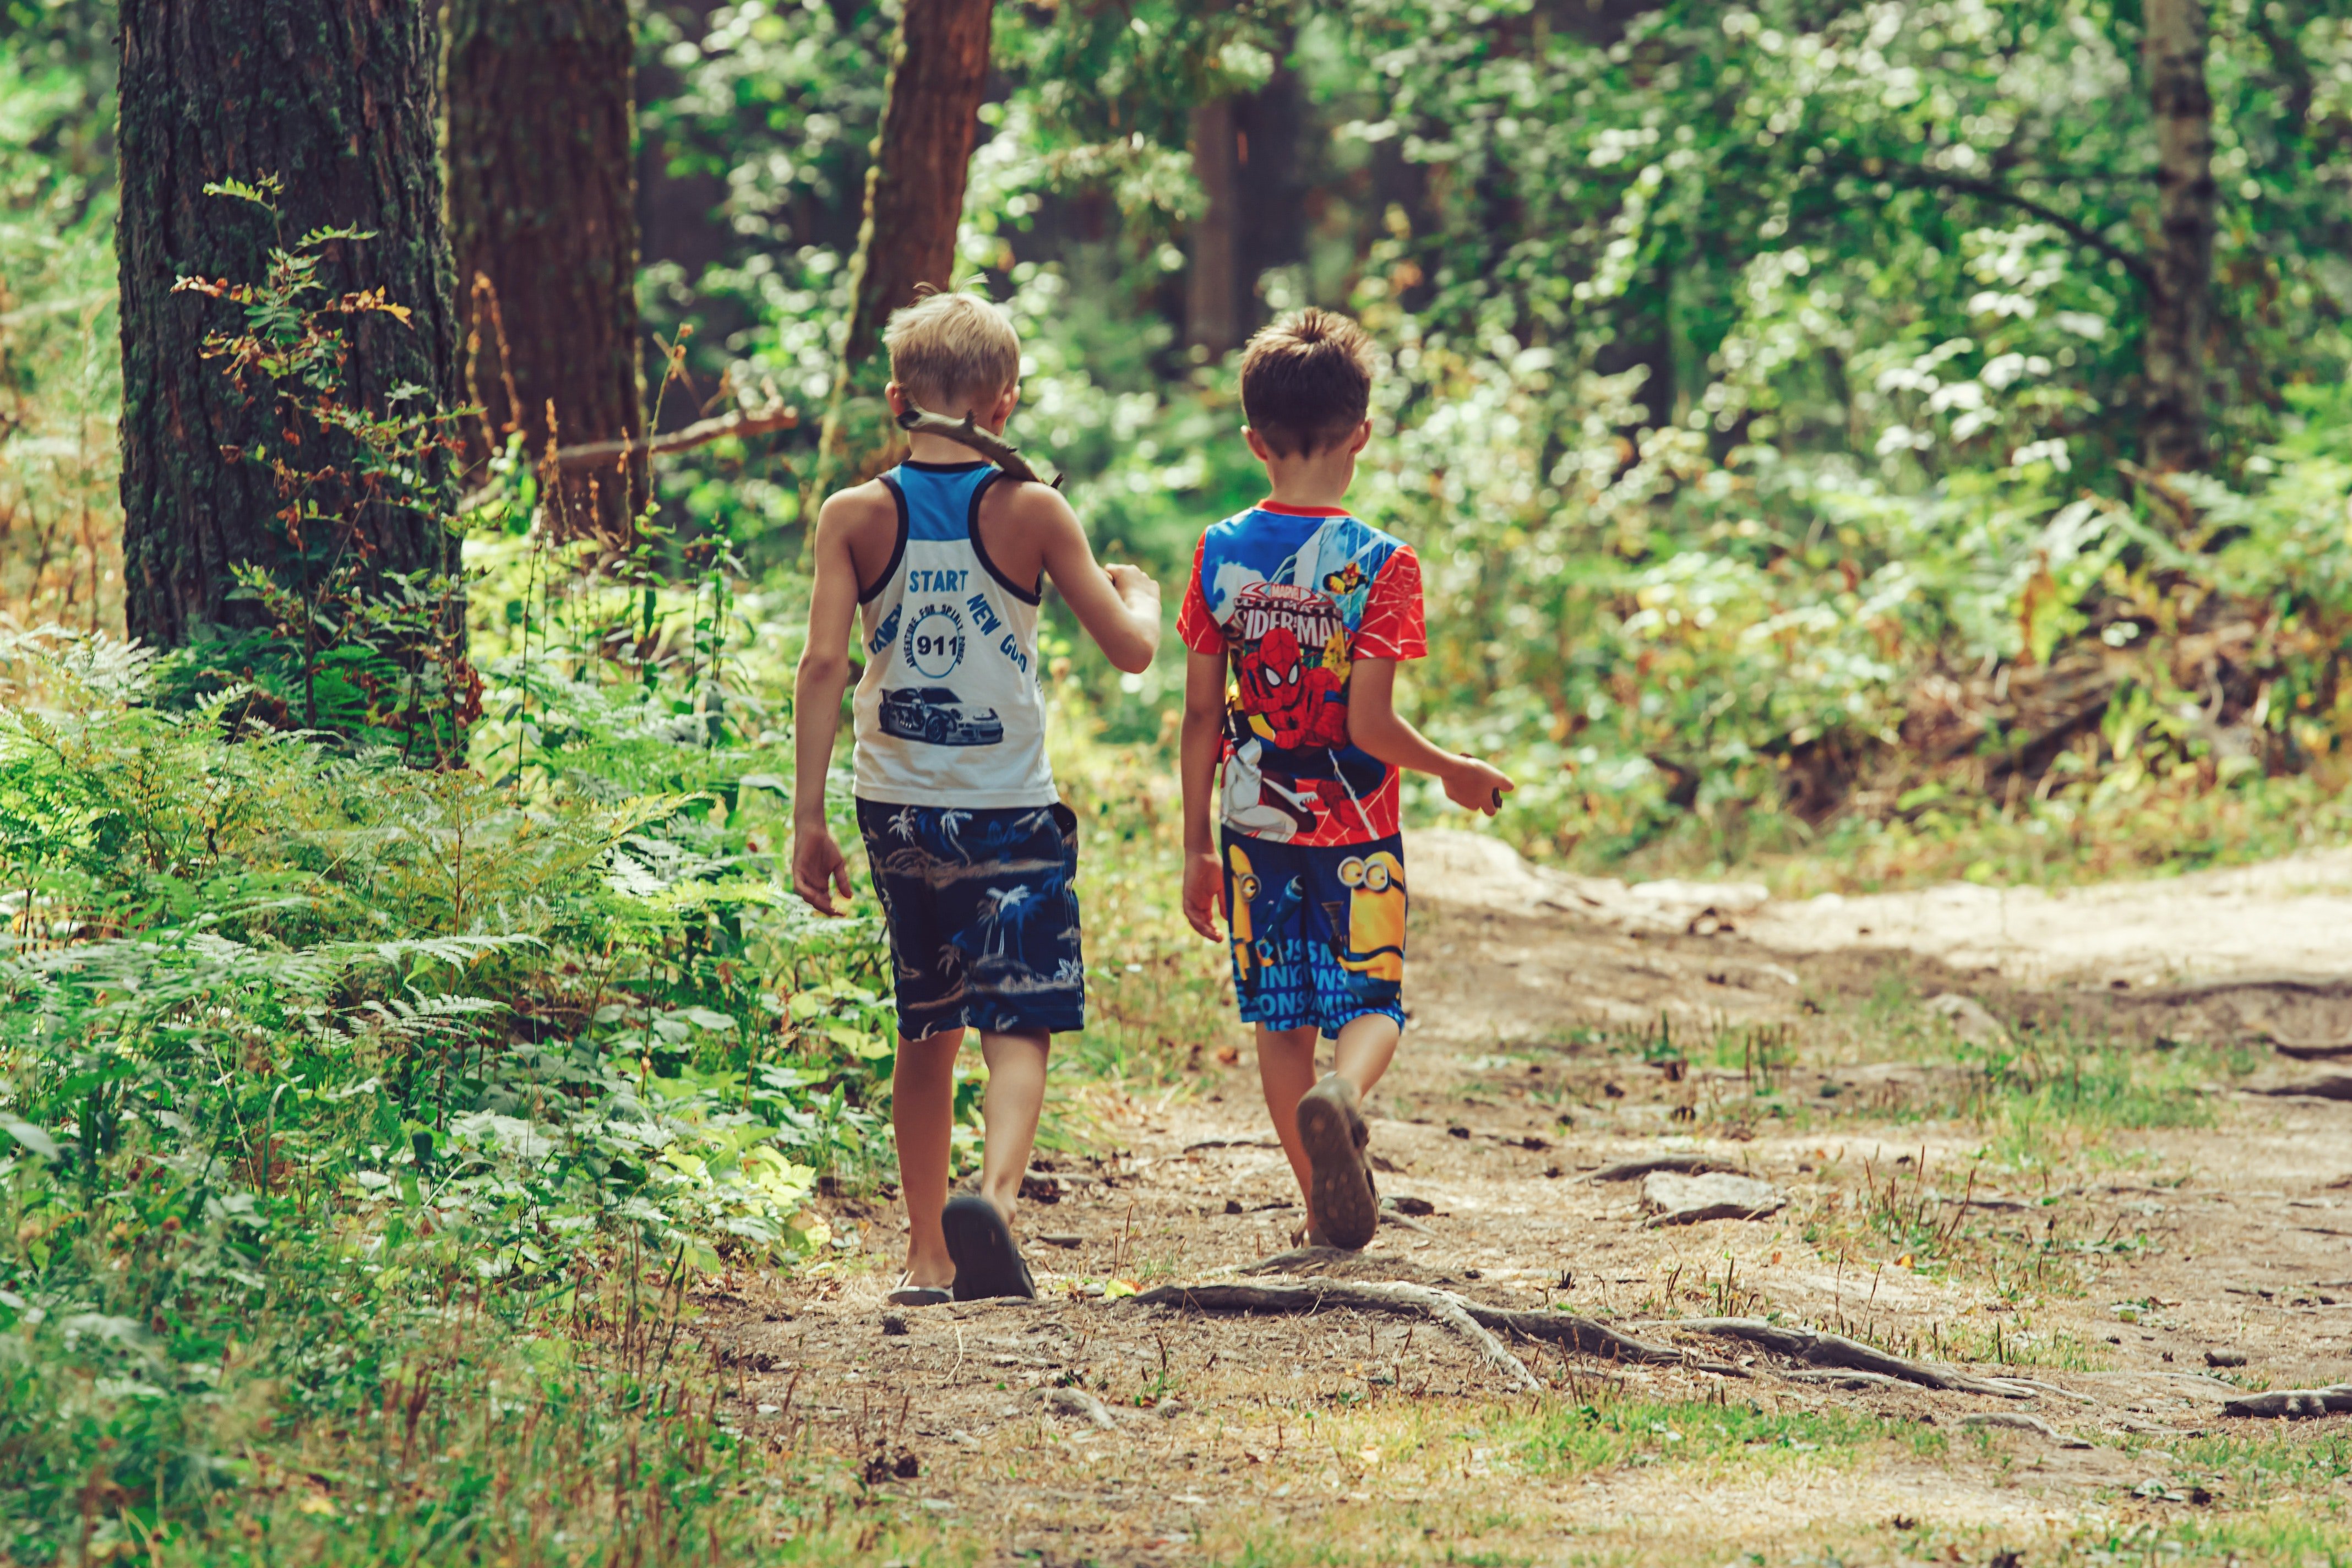 Mark decided to follow the two boys. | Source: Unsplash